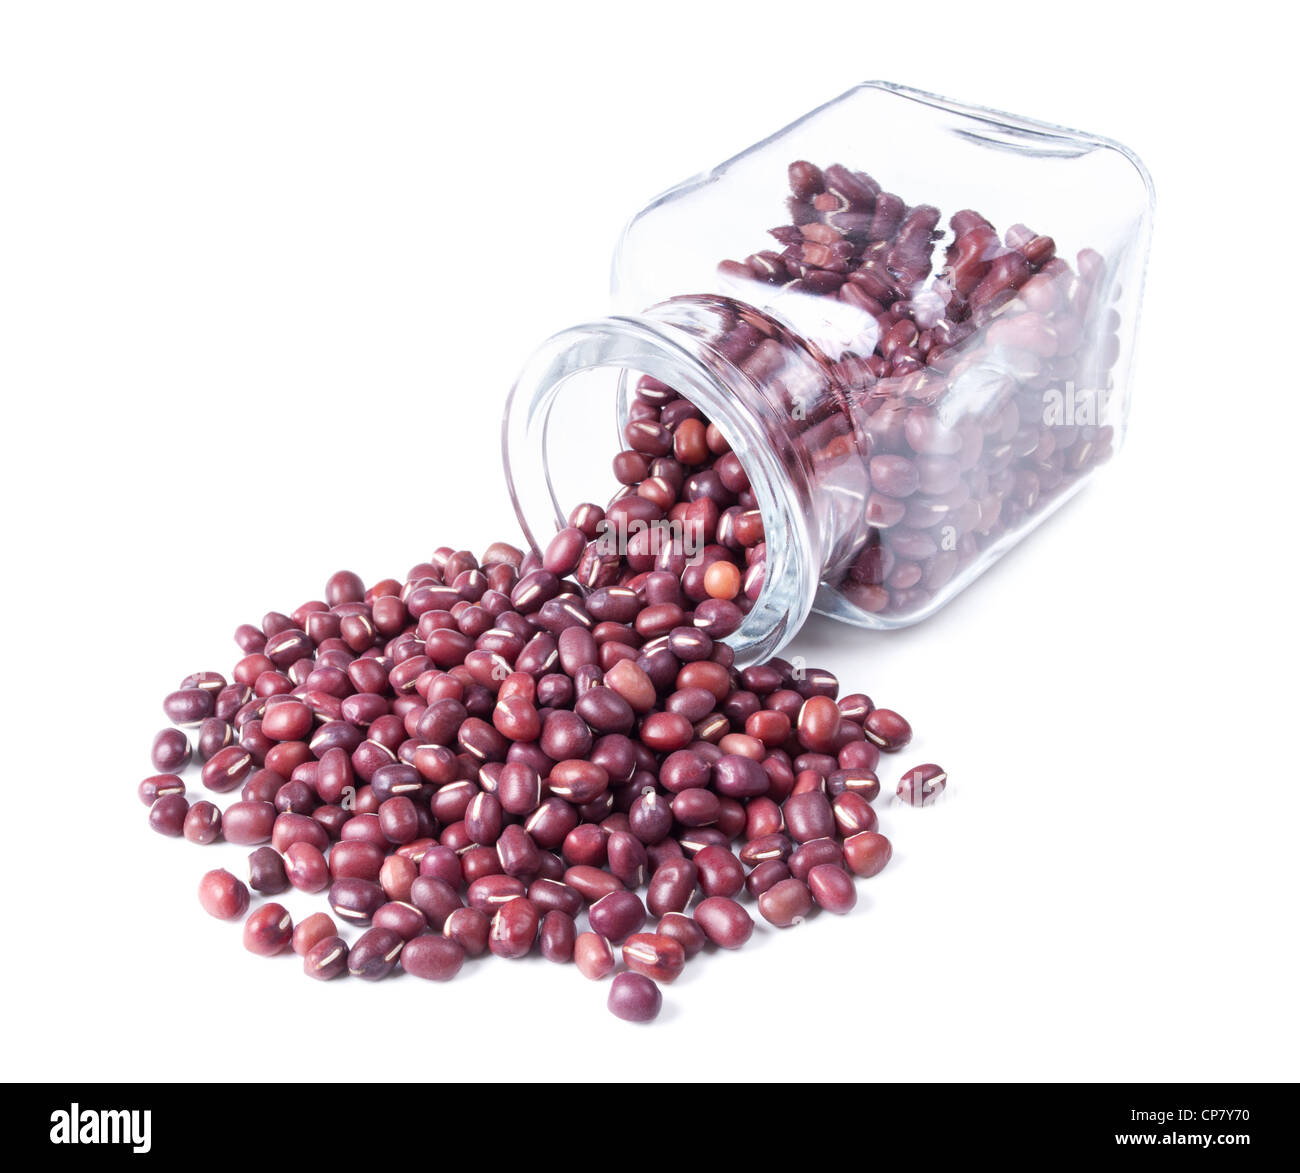 adzuki beans scattered on a white background from glass jar Stock Photo